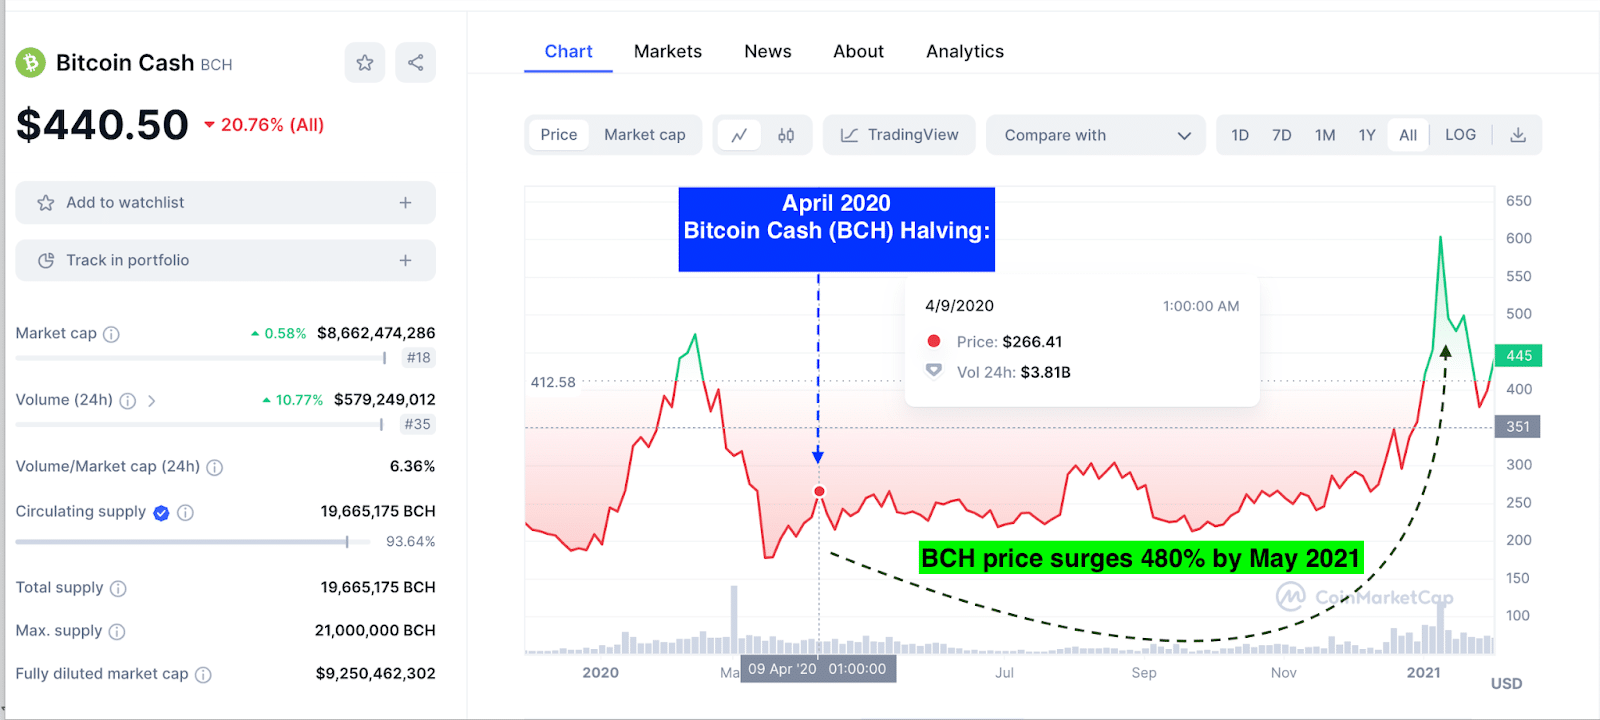 Bitcoin Cash (BCH) price action after April 2020 halving event